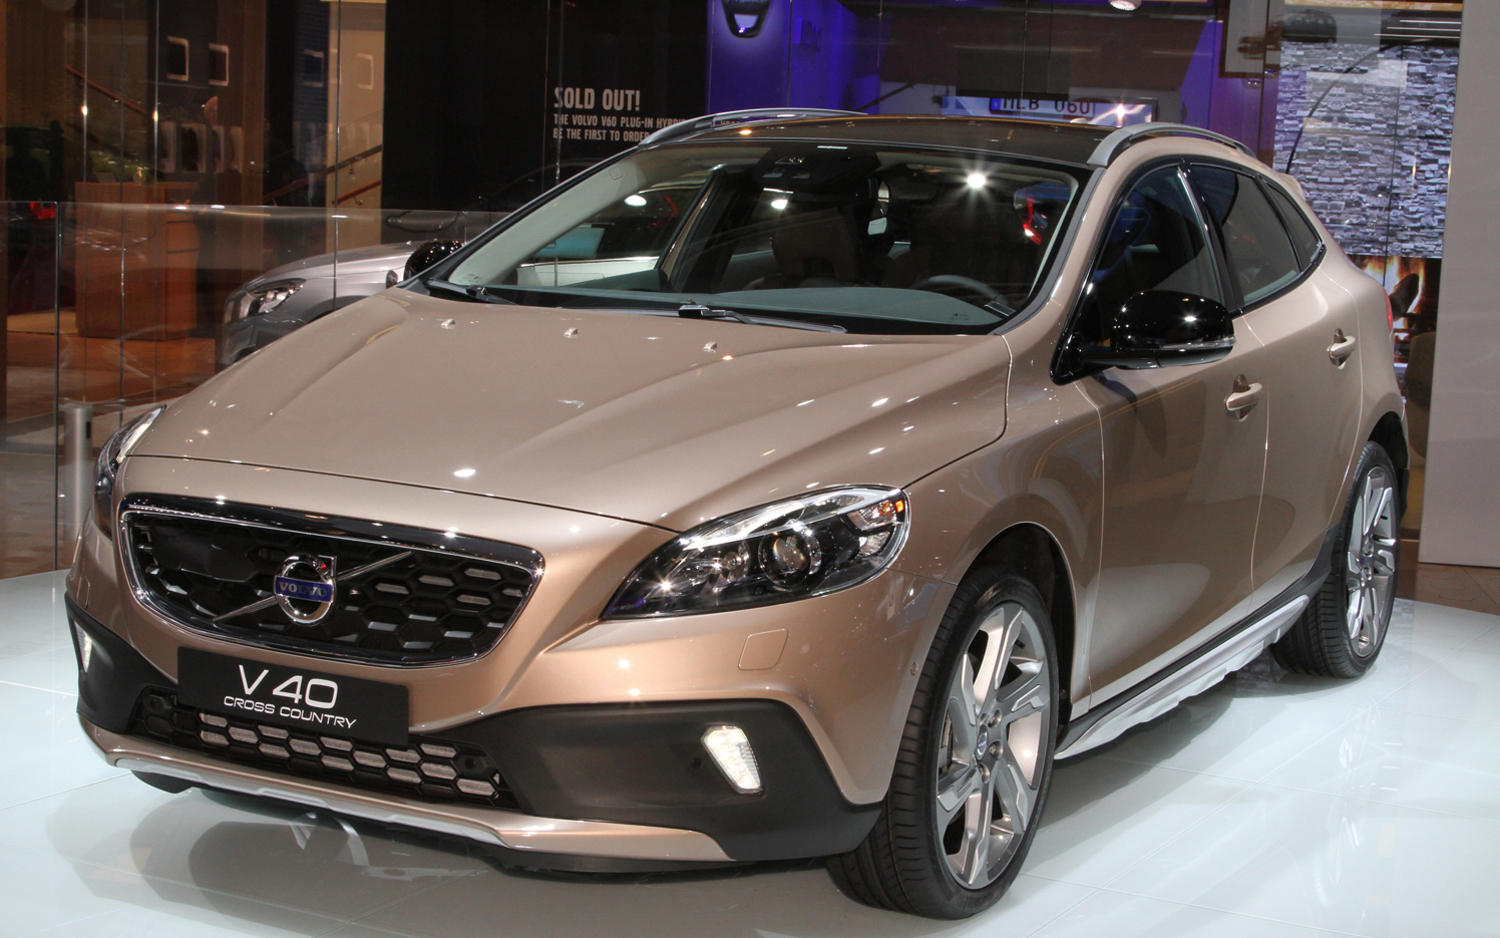 volvo-v40-cross-20country-front